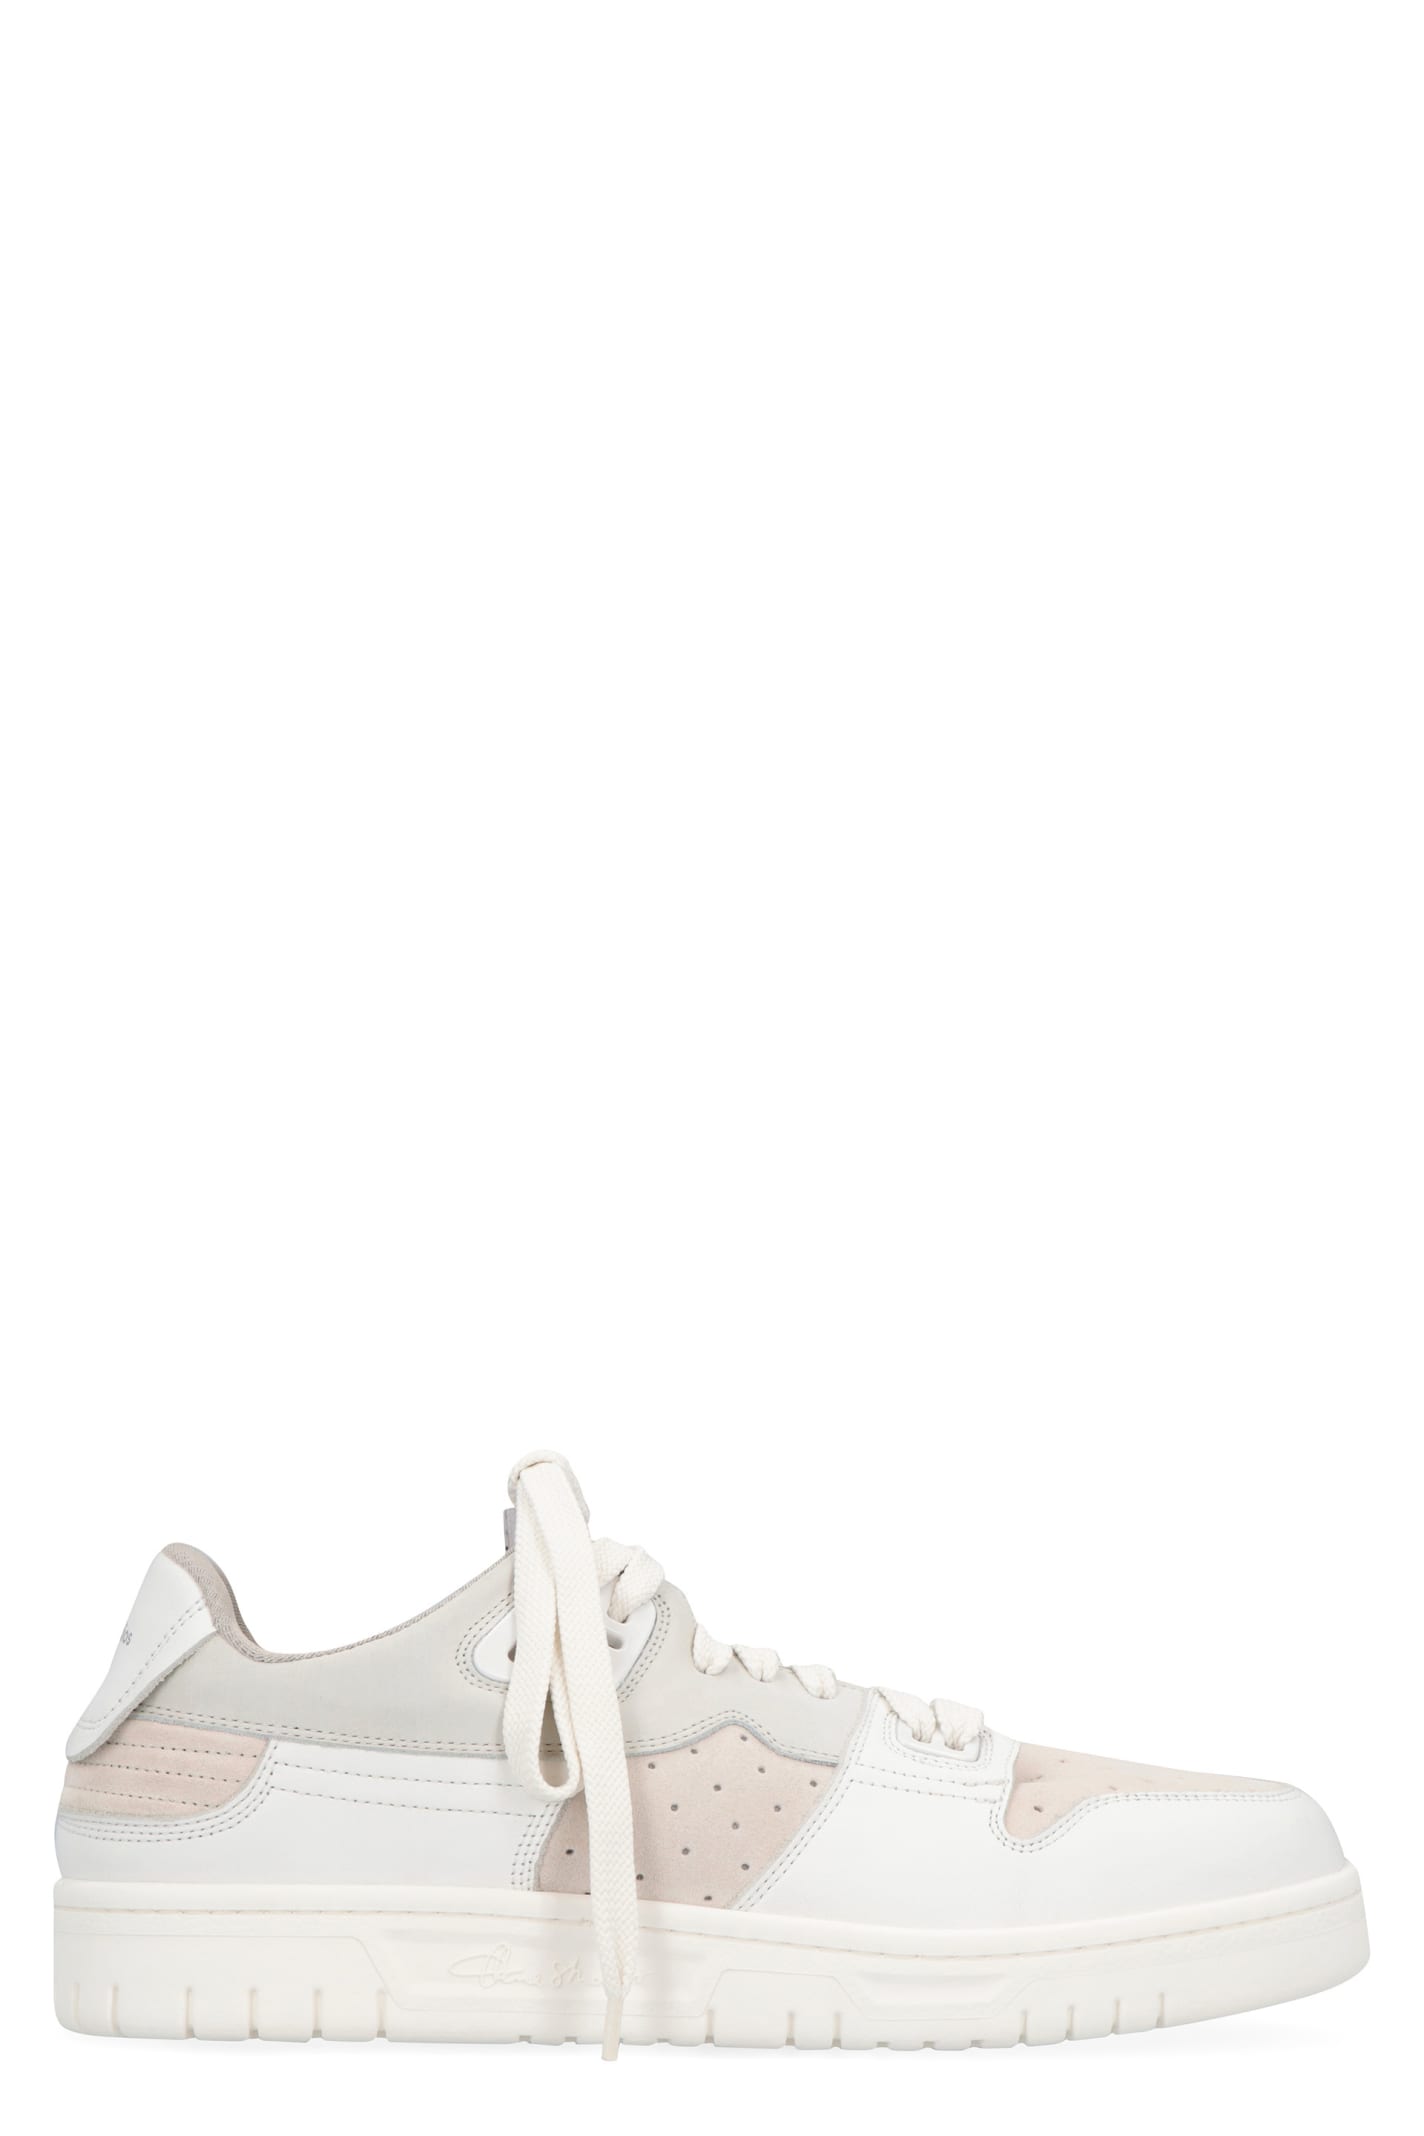 Acne Studios Leather Low-top Sneakers